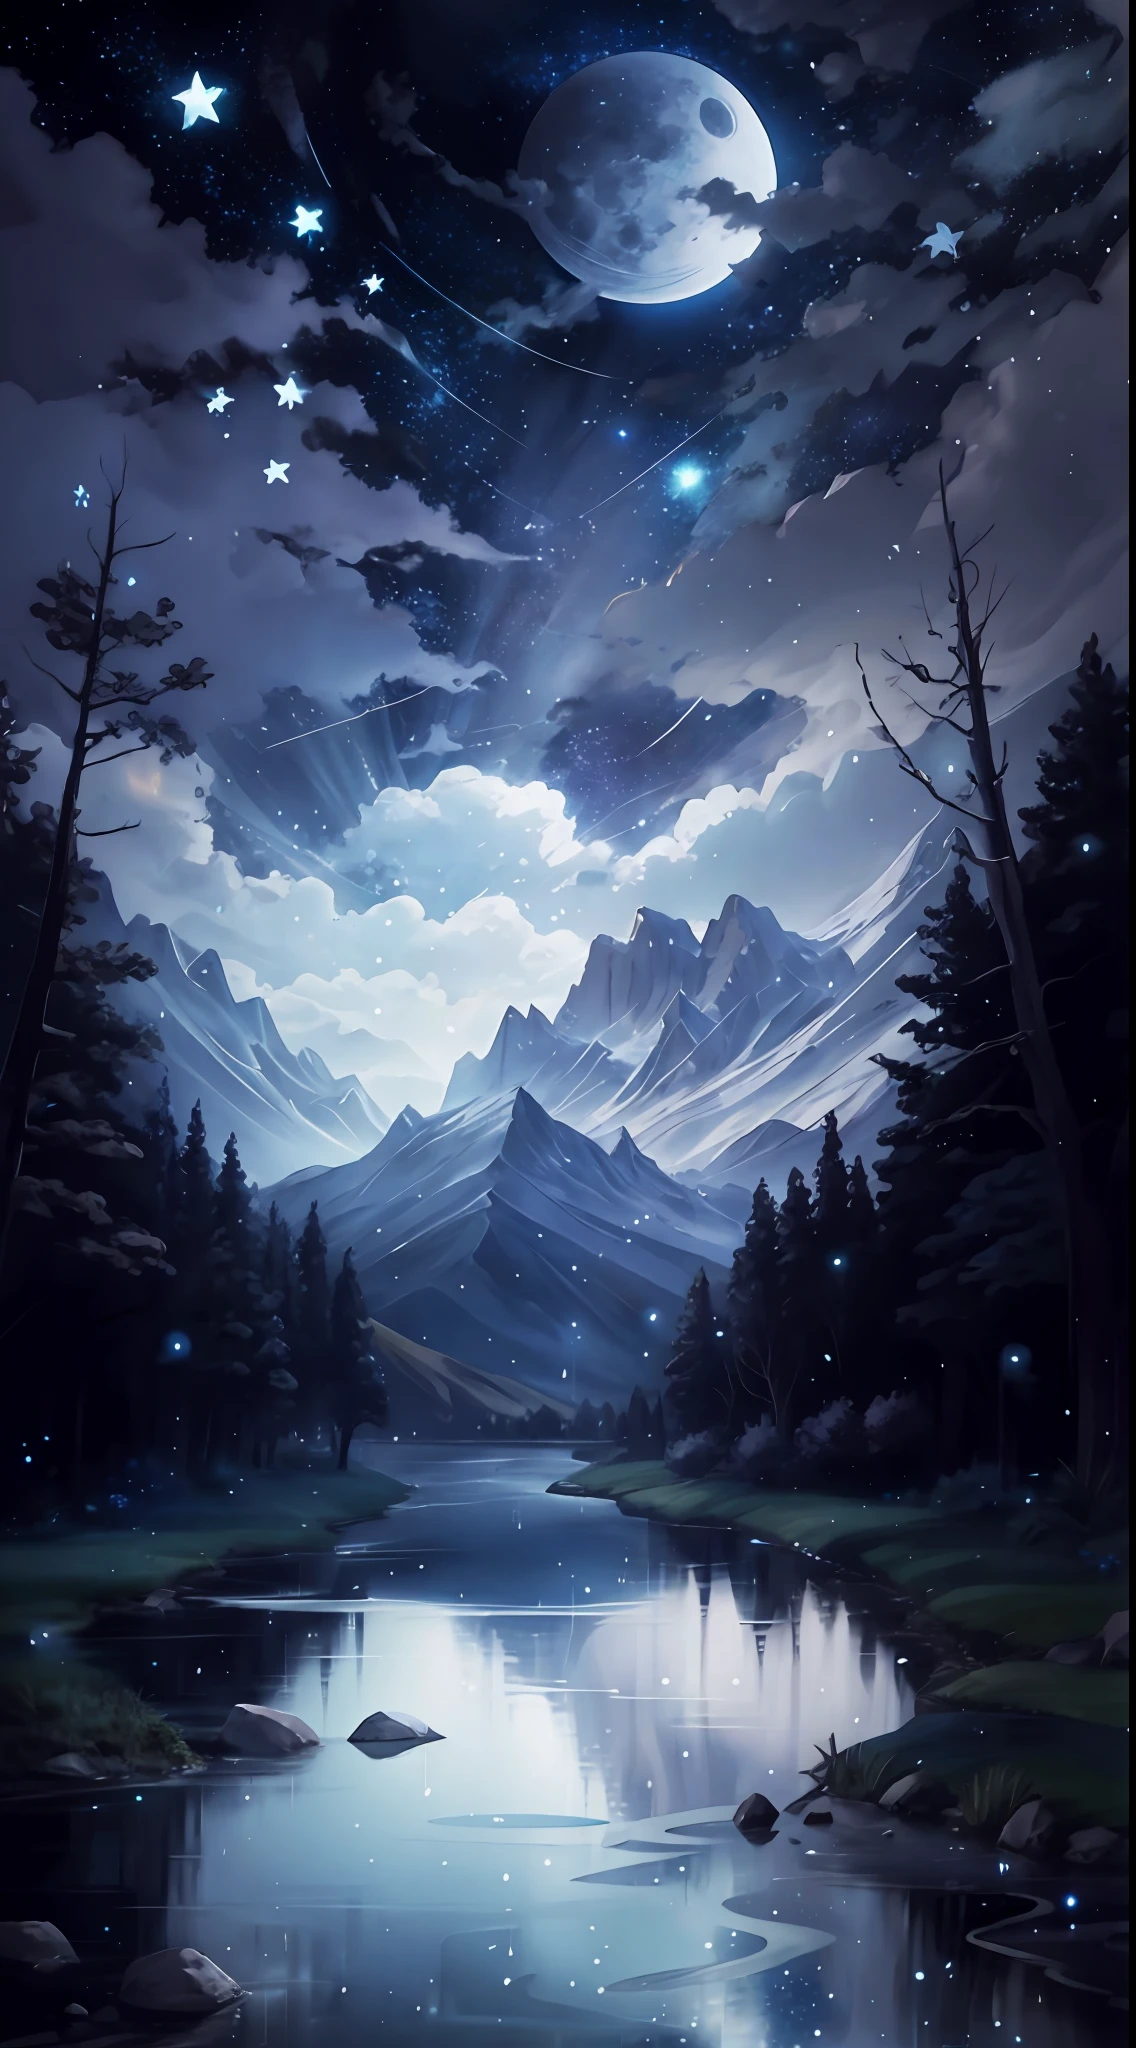 A painting of a river with stars and moon in the sky, concept art inspired by Tosa Mitsuoki, pixiv contest winner, best quality, fantasy art, beautiful anime scene, a bright moon, moonlit starry environment, dream painting, Anime Background Art, Fantasy Landscape Art, Fantasy Night, Anime Background, Background Artwork, Fantastic Art, Atmospheric Anime, Starry Sky, Detail Enhanced.